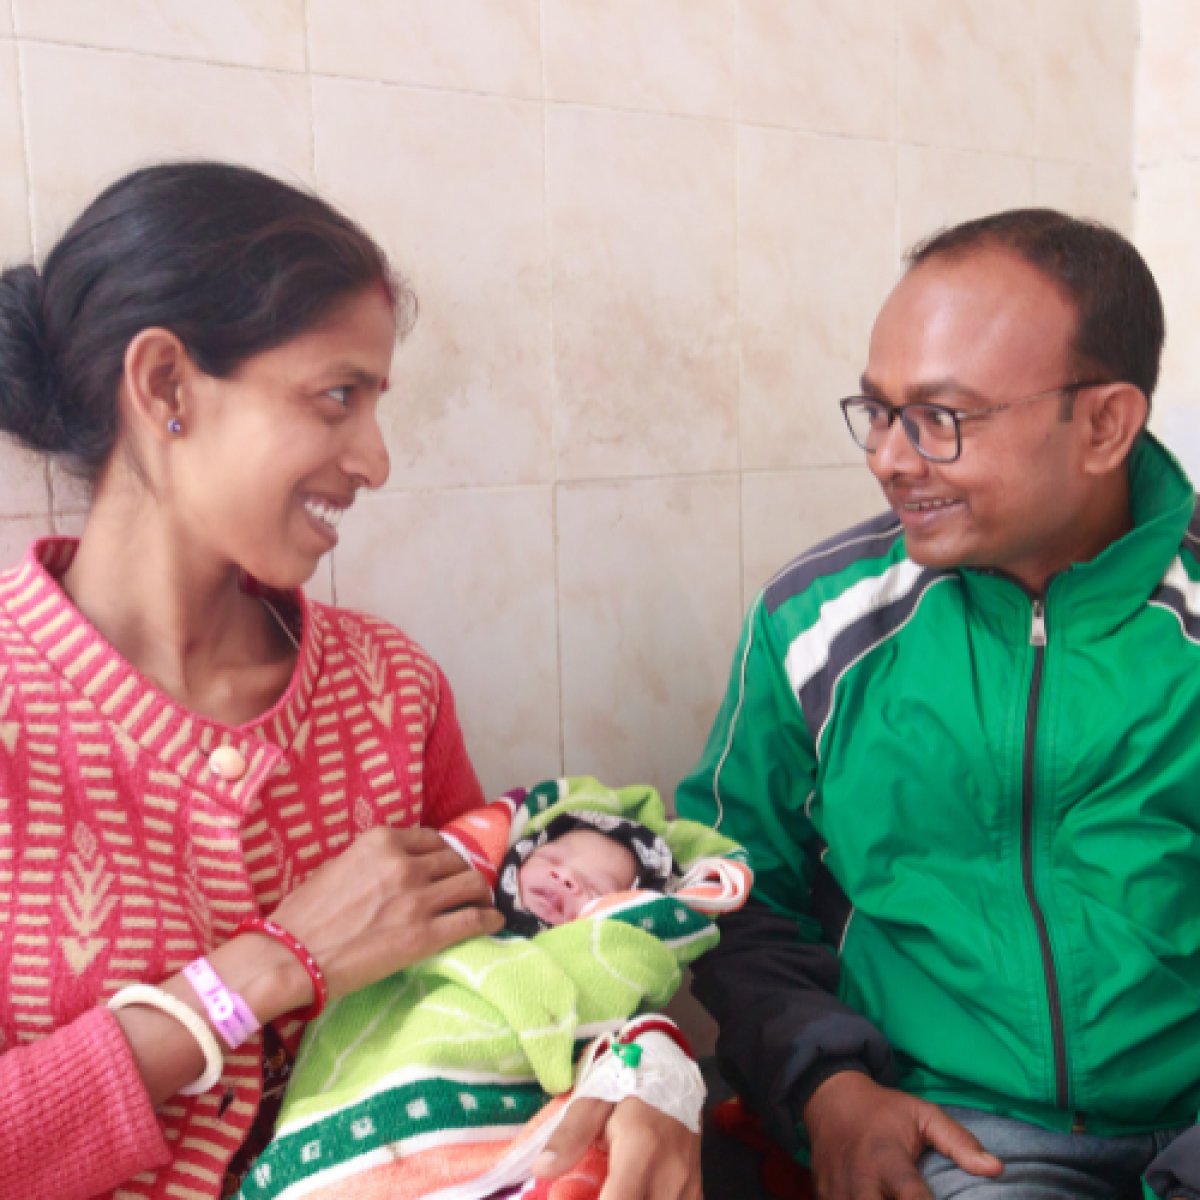 Shivani (left) and Amit (right) admire their new baby at the Ranchi District Hospital in India.